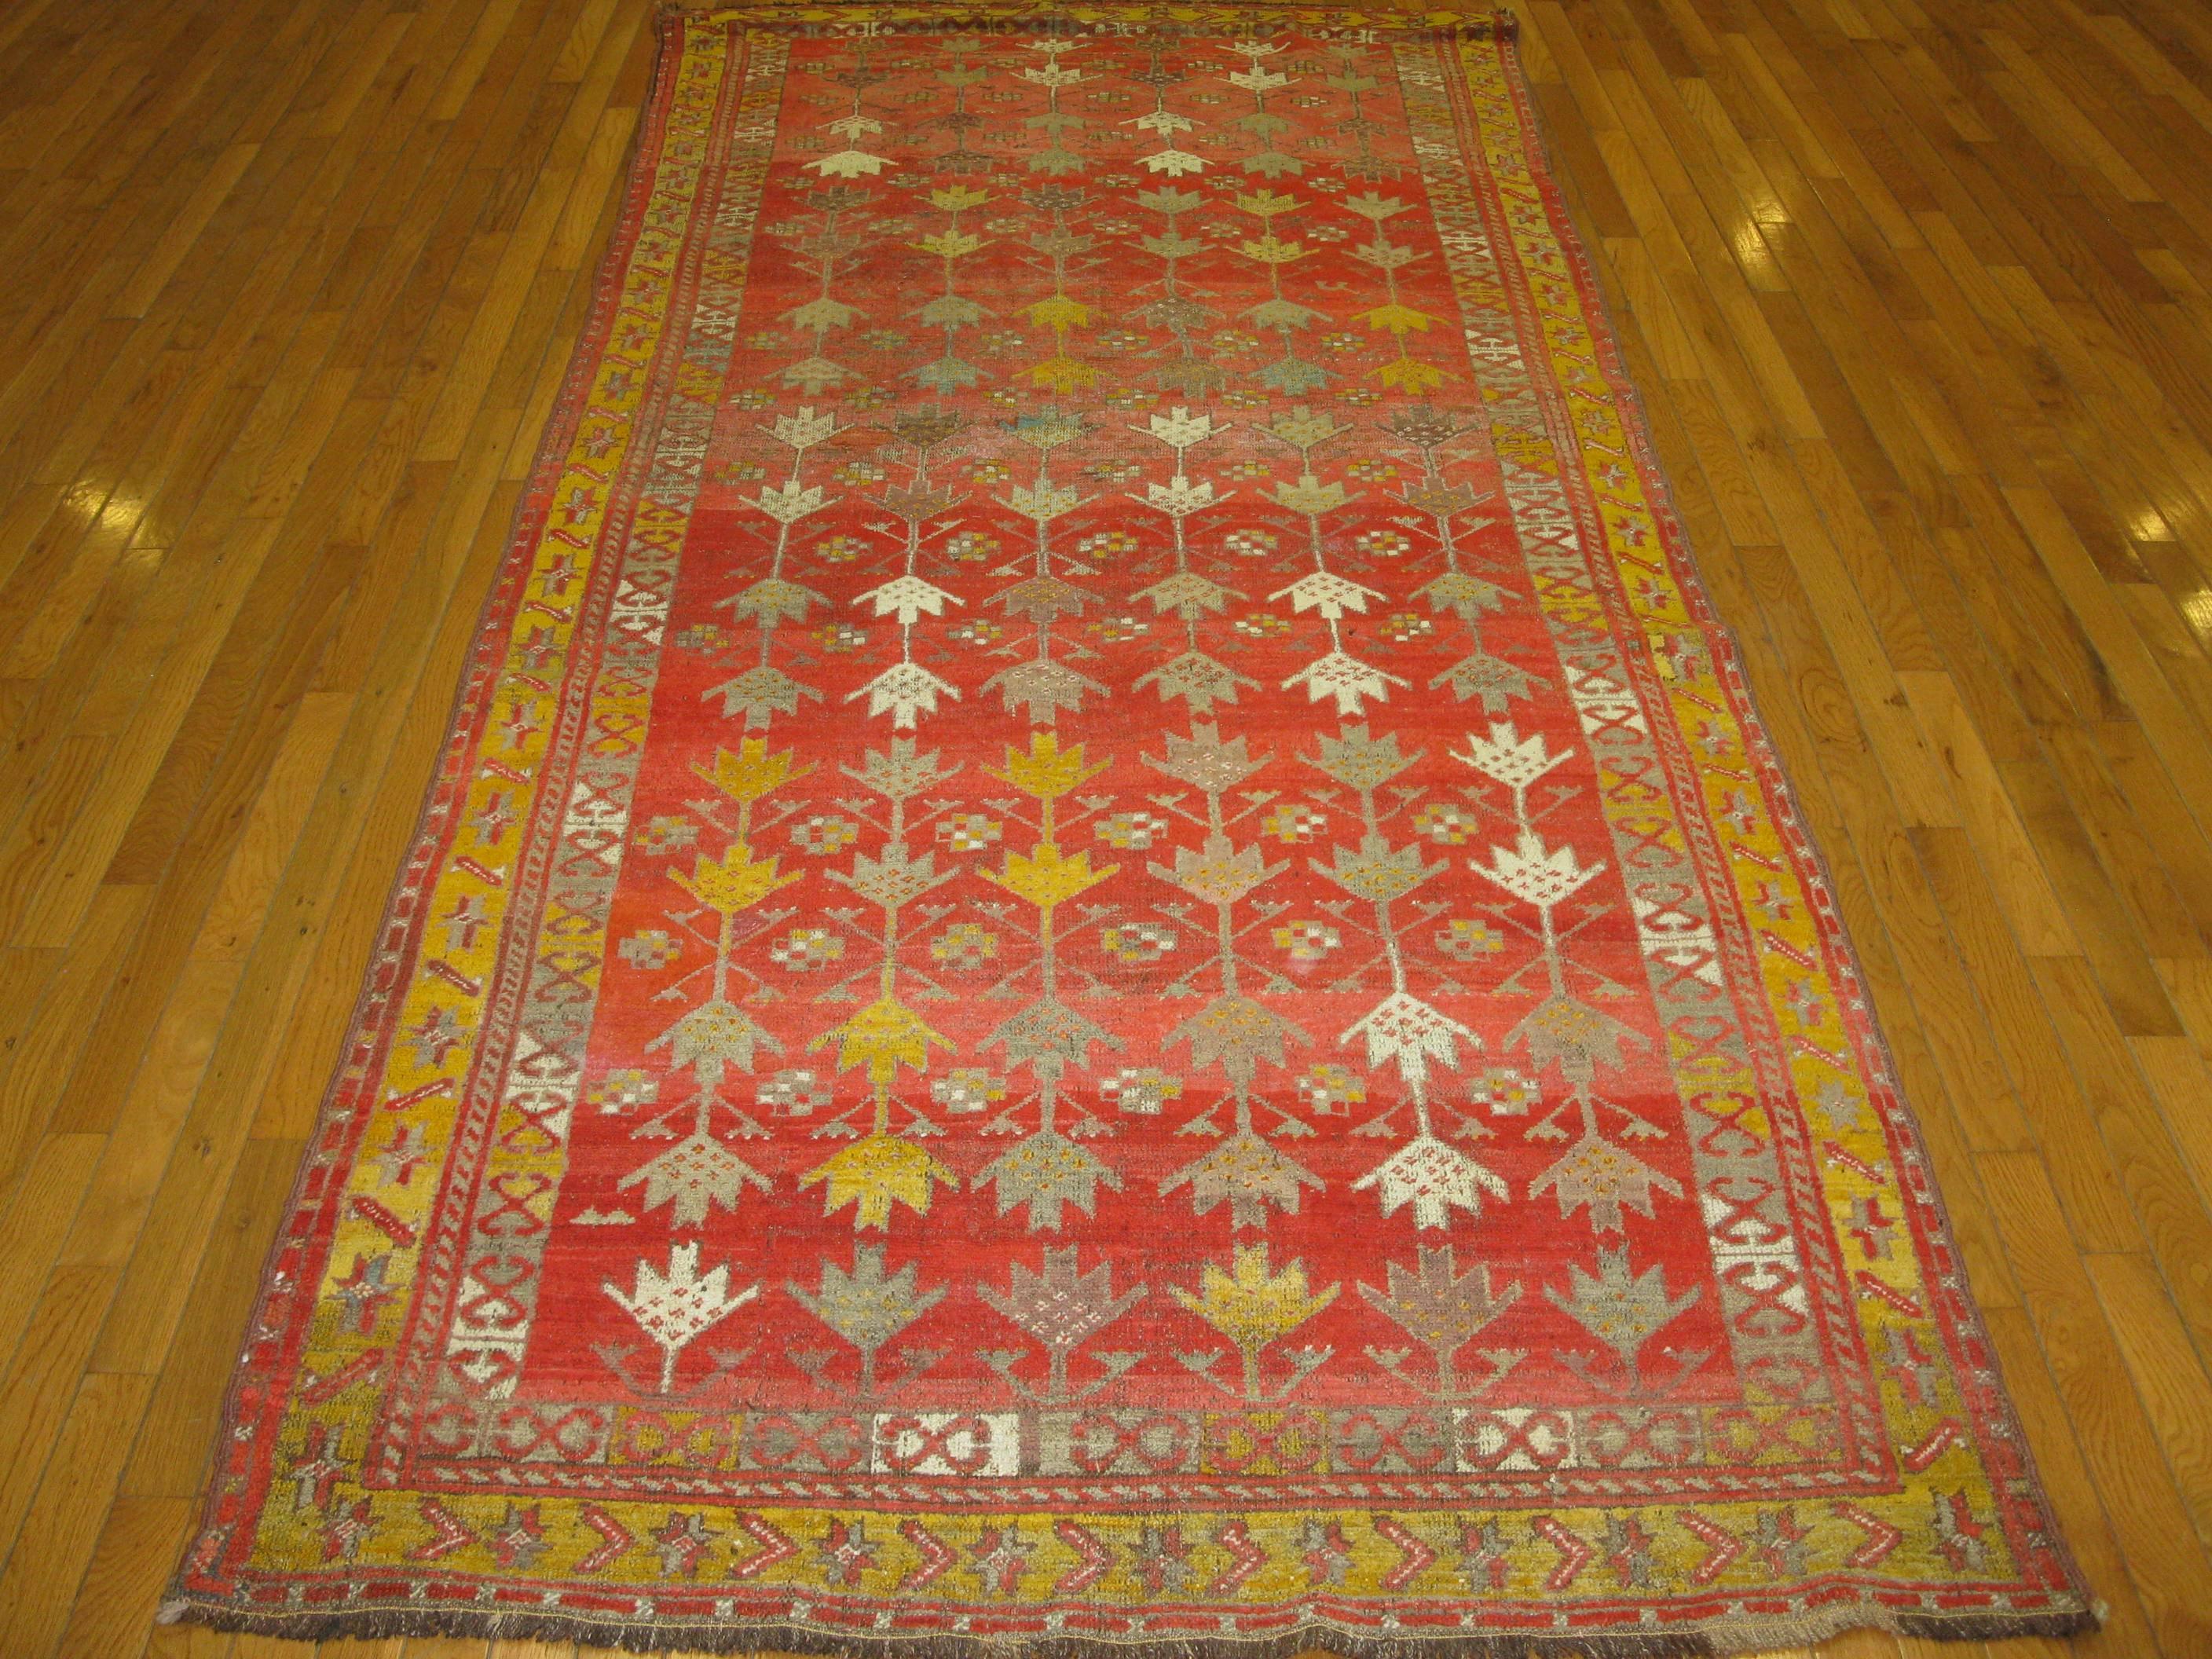 This is a beautiful hand-knotted antique Turkish Oushak rug with a unique all-over pattern on a coral red background. The rug measures 4' 4'' x 9' 10'' and is in great condition.